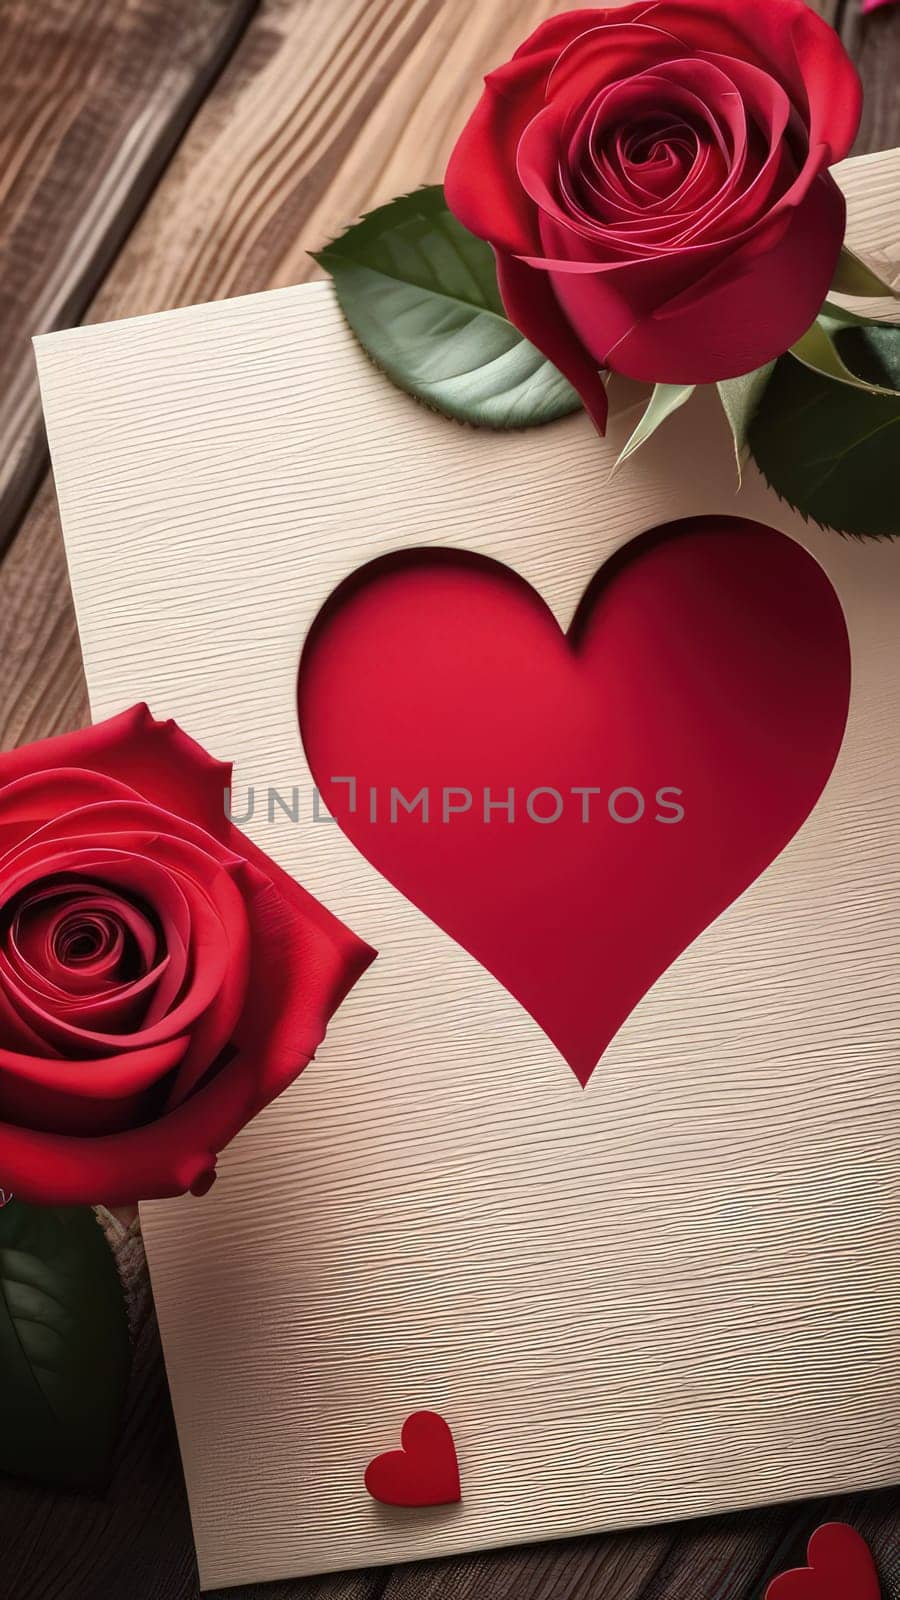 St. Valentines day, wedding vertical banner with abstract illustrated red heart, roses on wood background. Use for cute love sale banners, print, vouchers or greeting cards. Concept love, copy space. by Angelsmoon